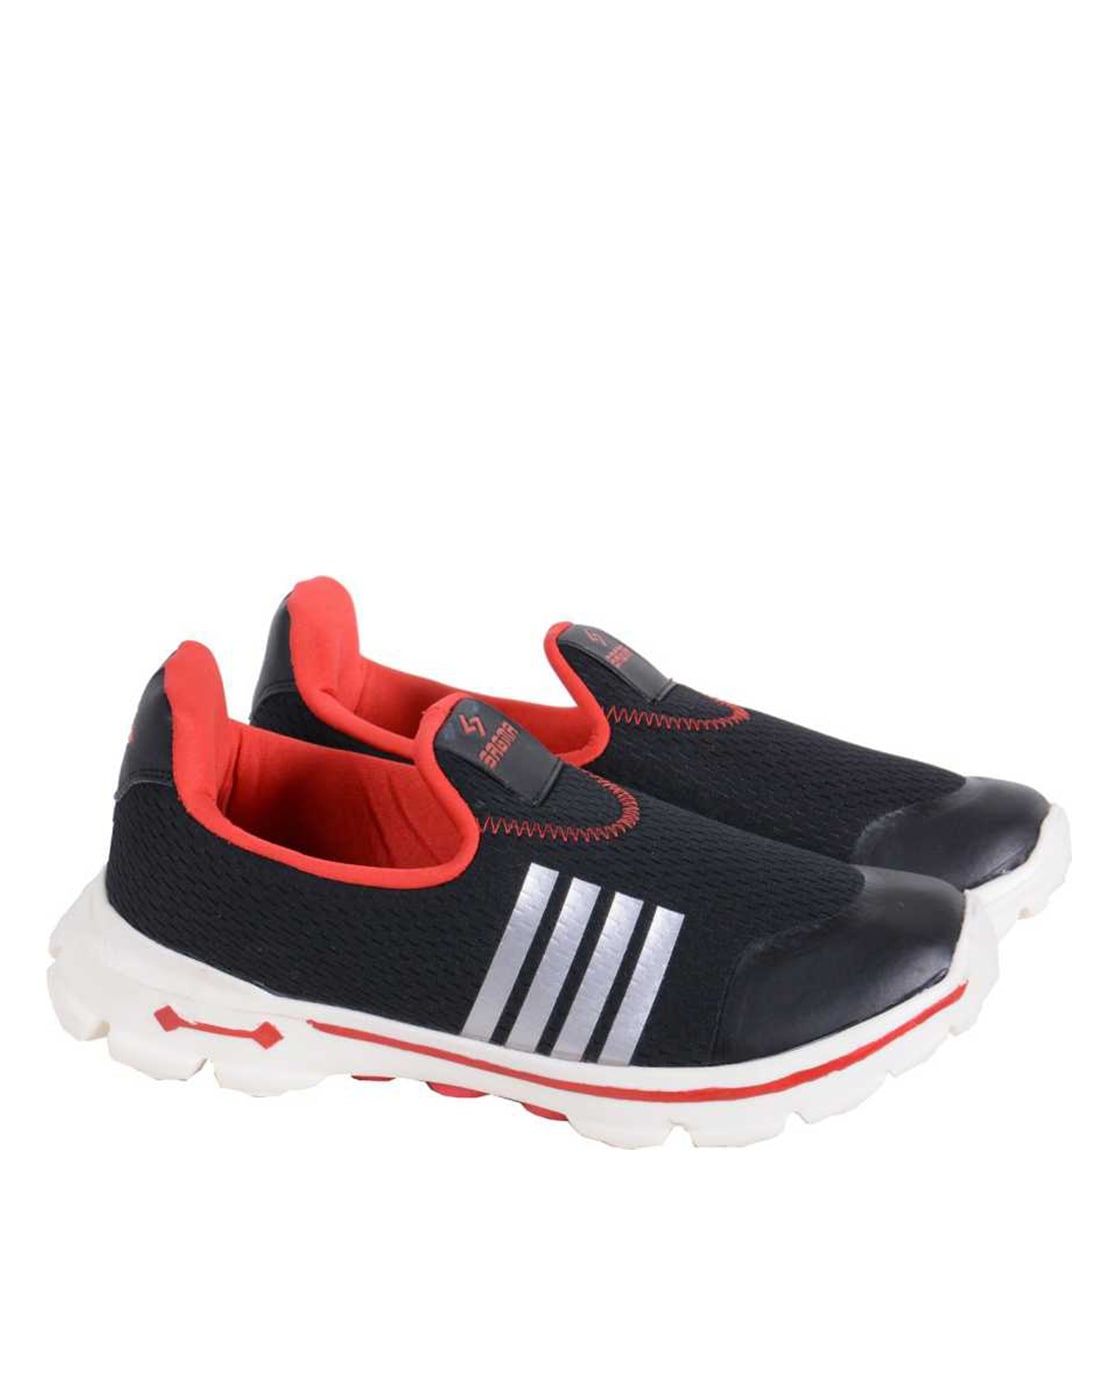 Buy Black Sports Shoes for Men by Online | Ajio.com